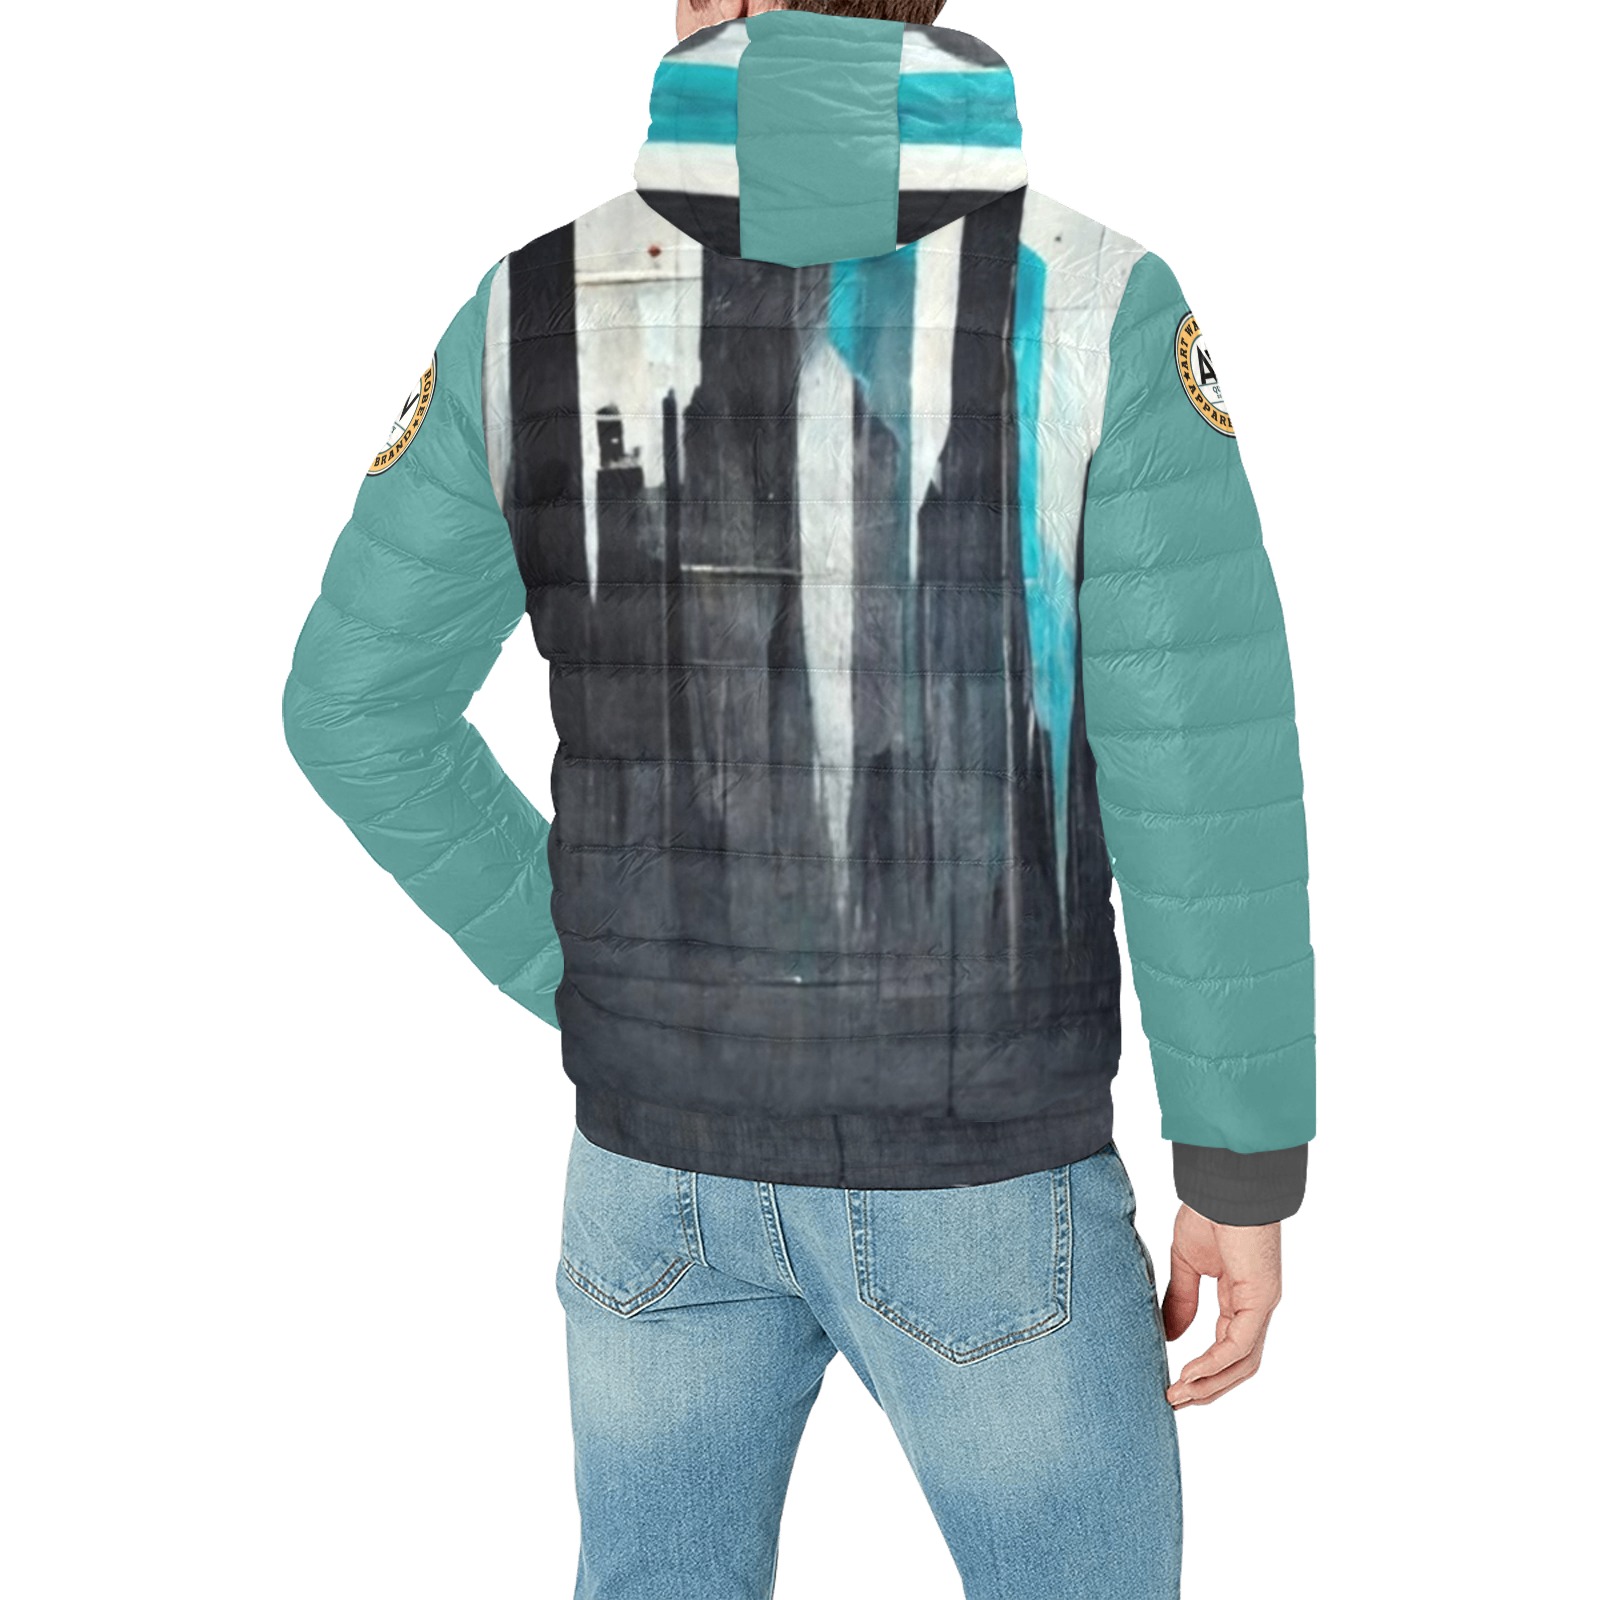 graffiti building's turquoise and black Men's Padded Hooded Jacket (Model H42)